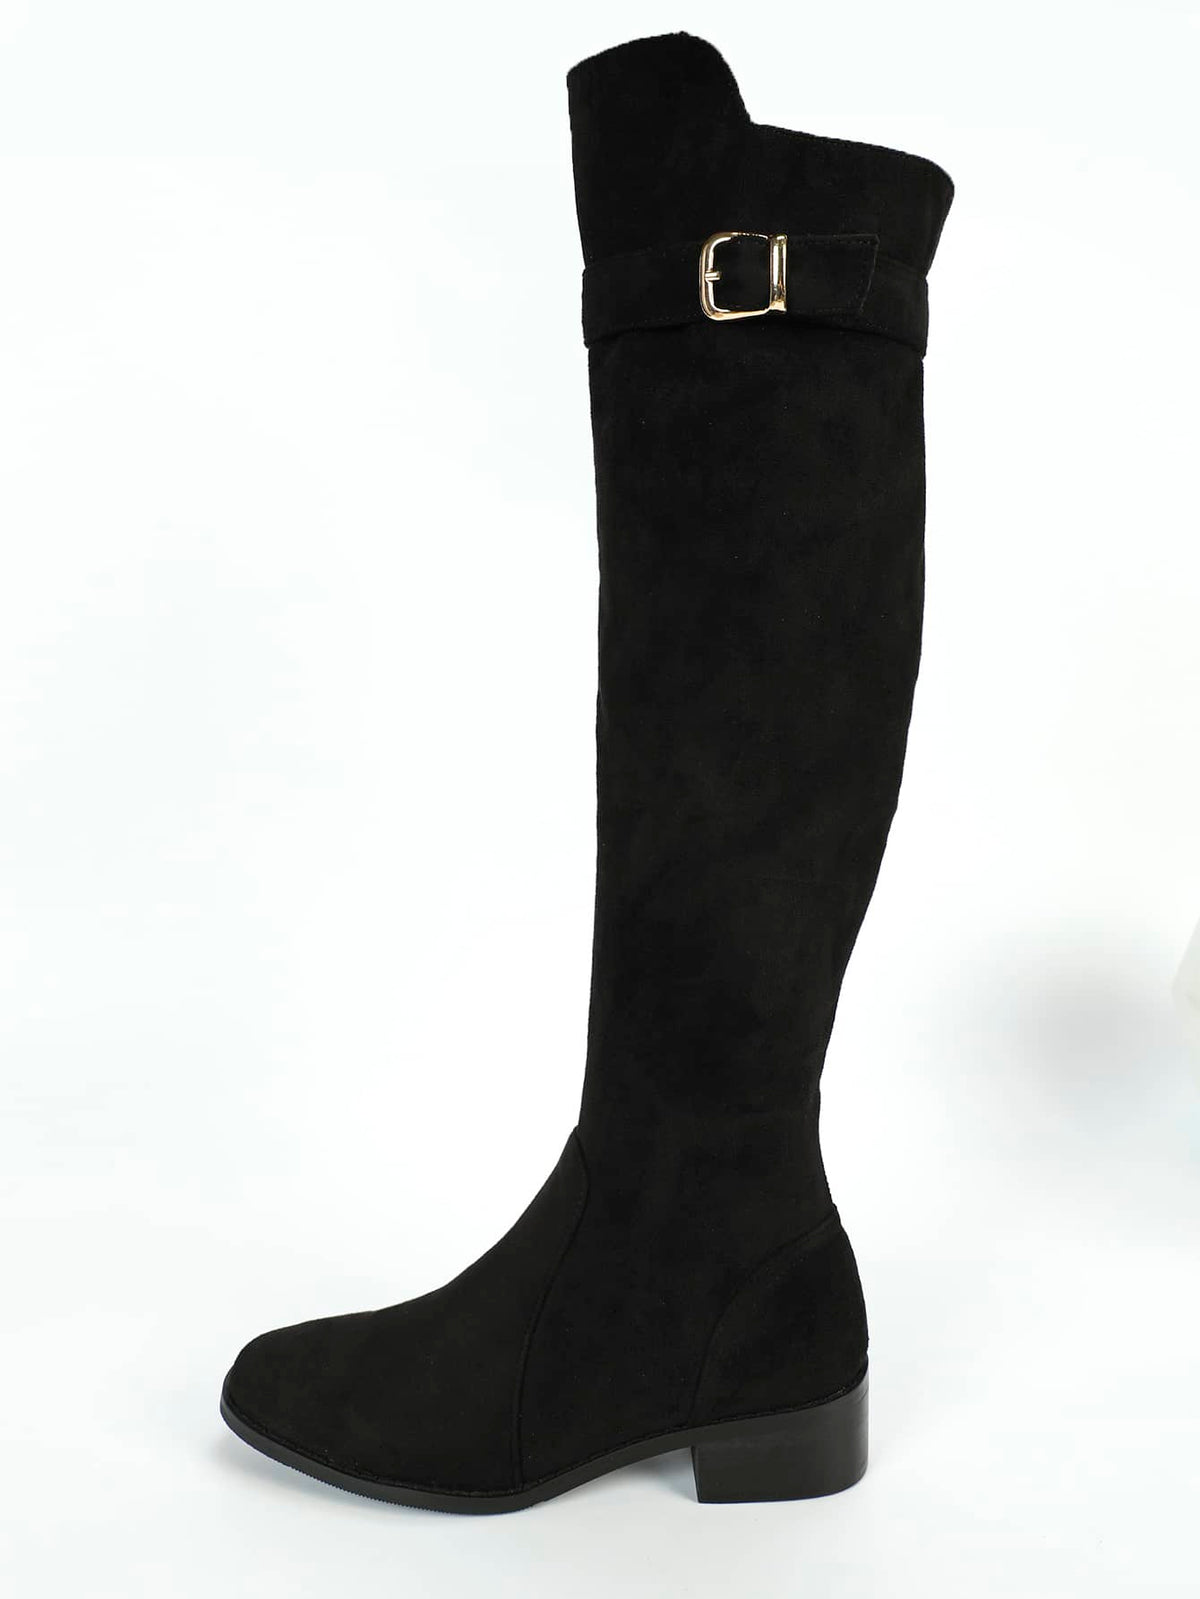 Women Black Knee High Riding Boot in Faux Suede with Buckle Decor Zipper Side